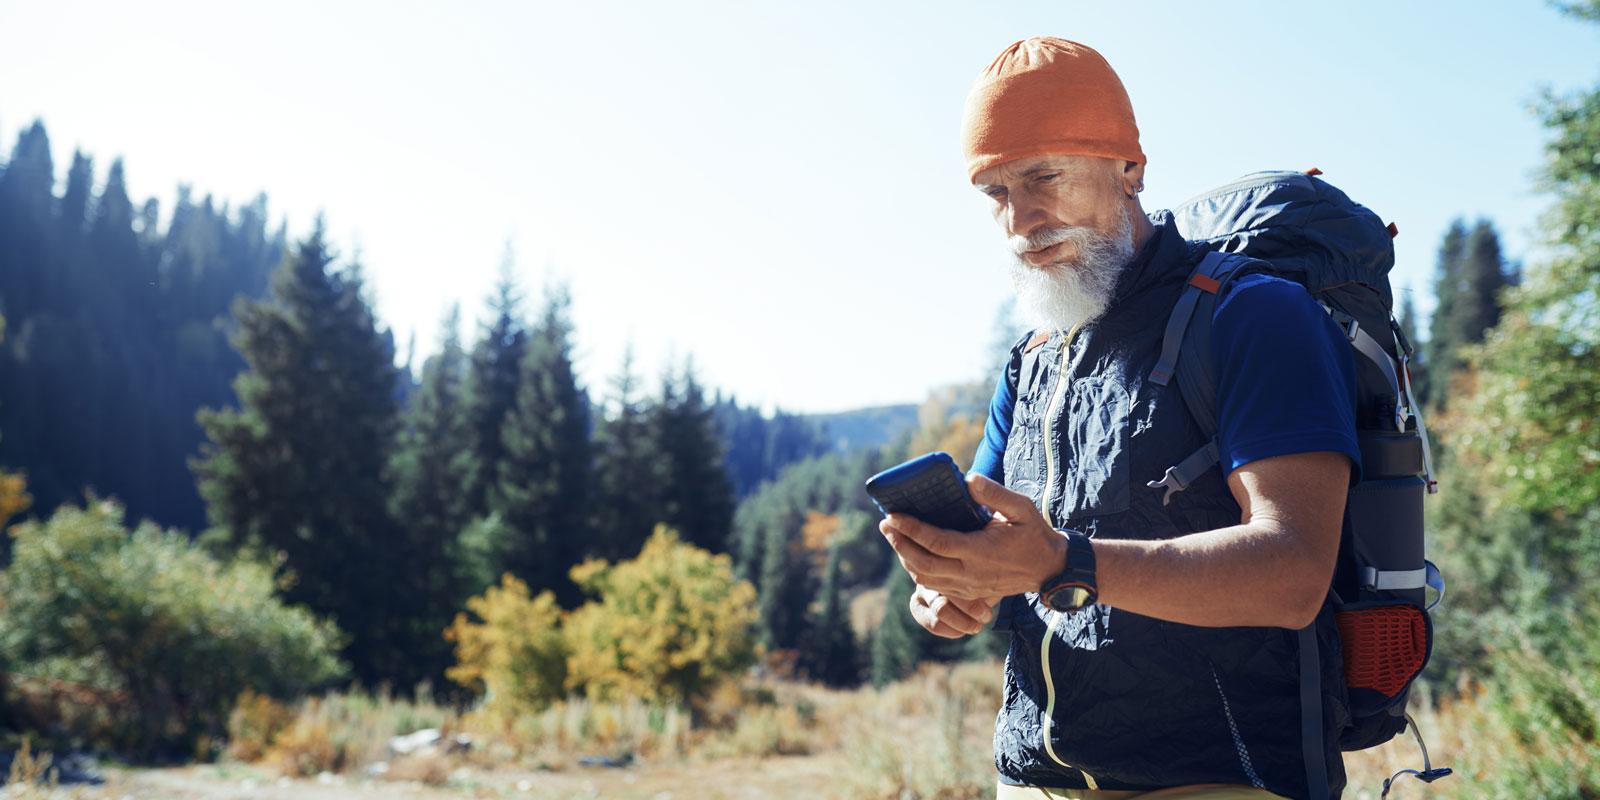 Generations: Baby Boomers Are More Active, Tech Savvy Than You May Think